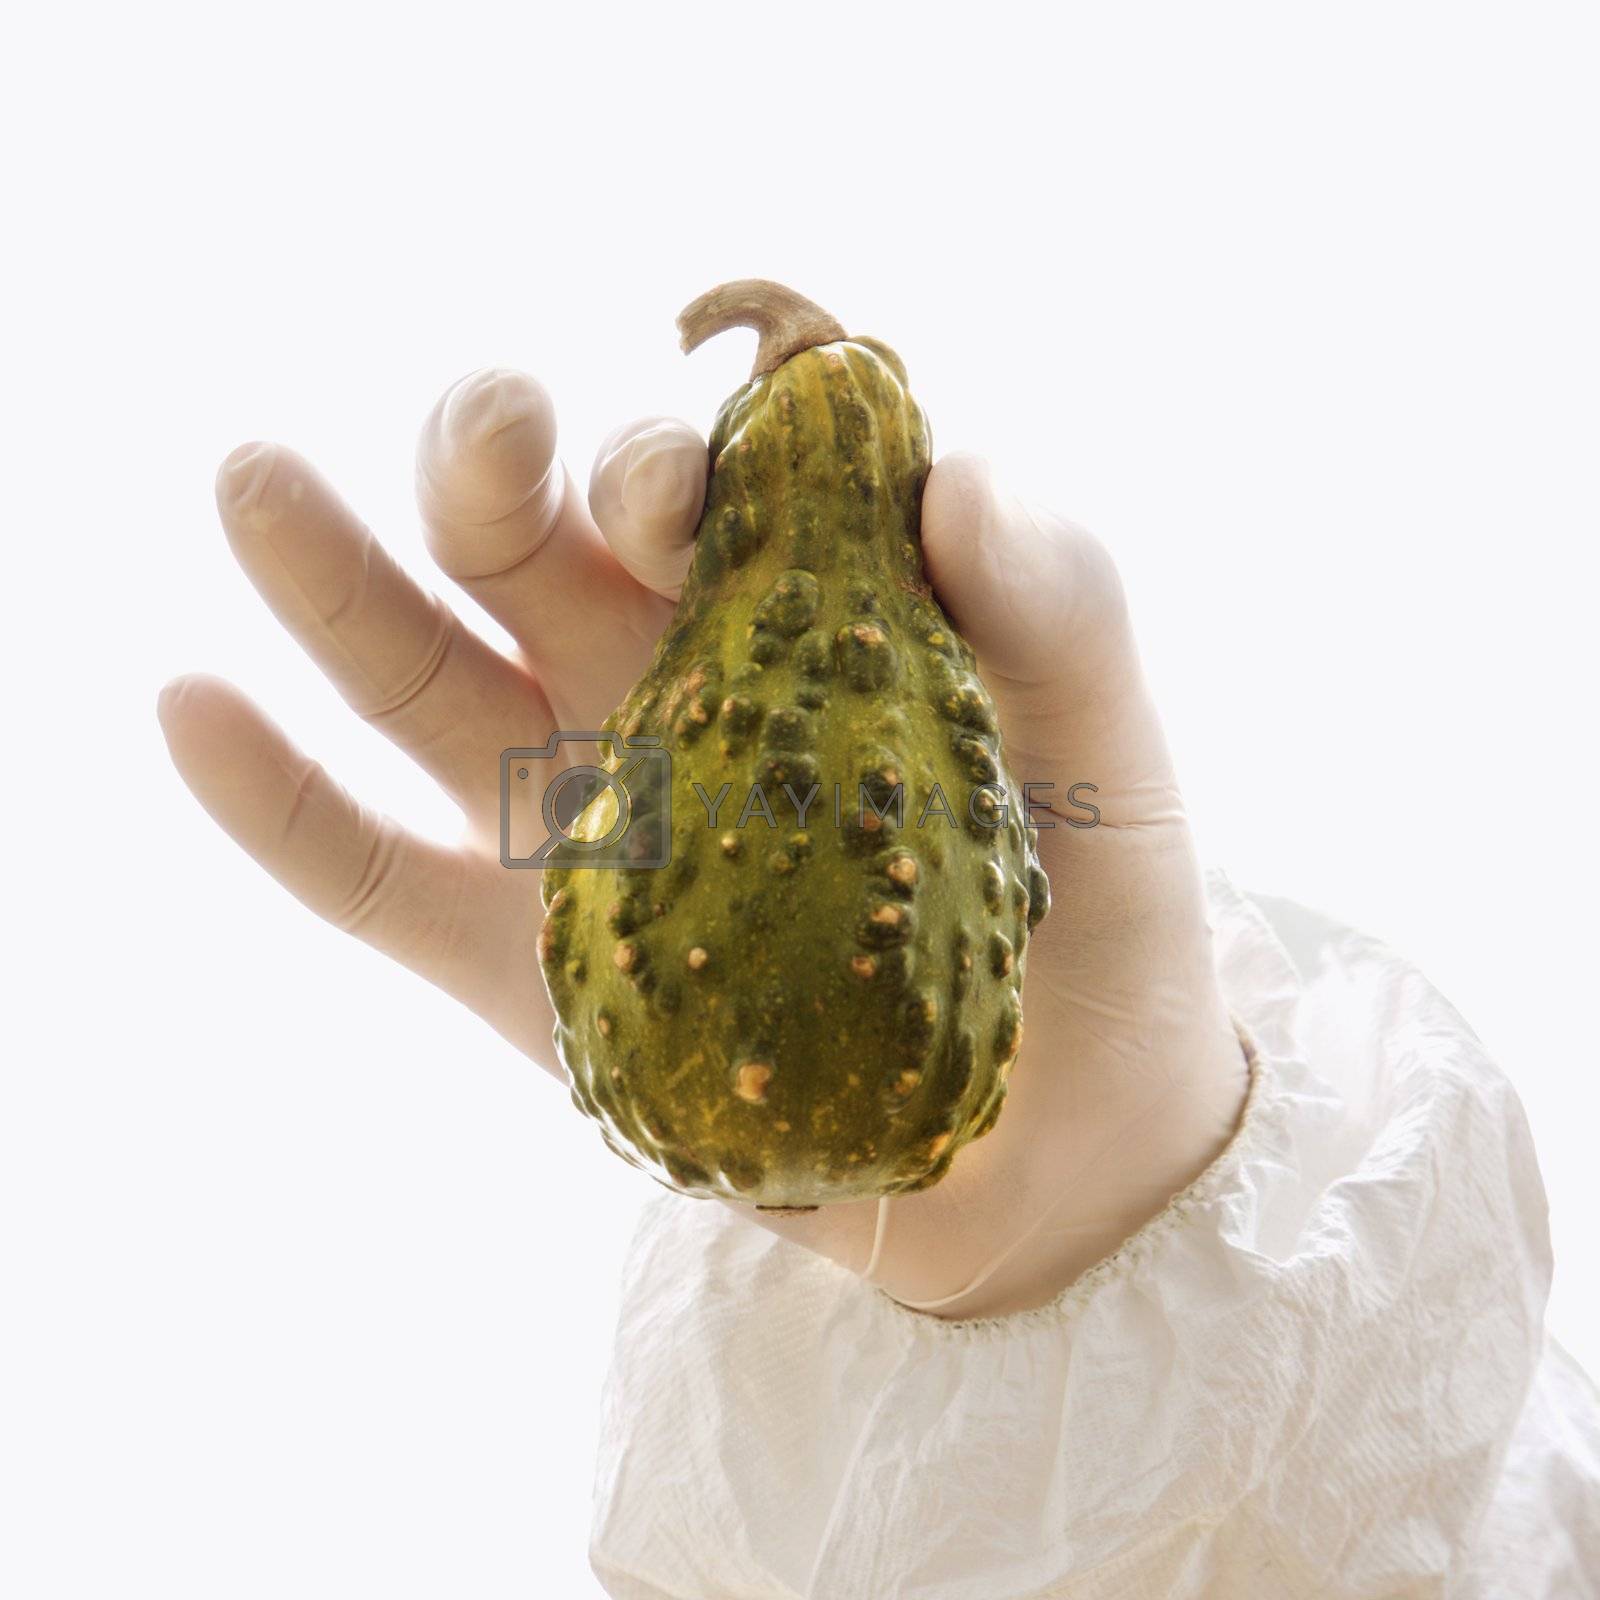 Royalty free image of Gloved hand holding gourd. by iofoto